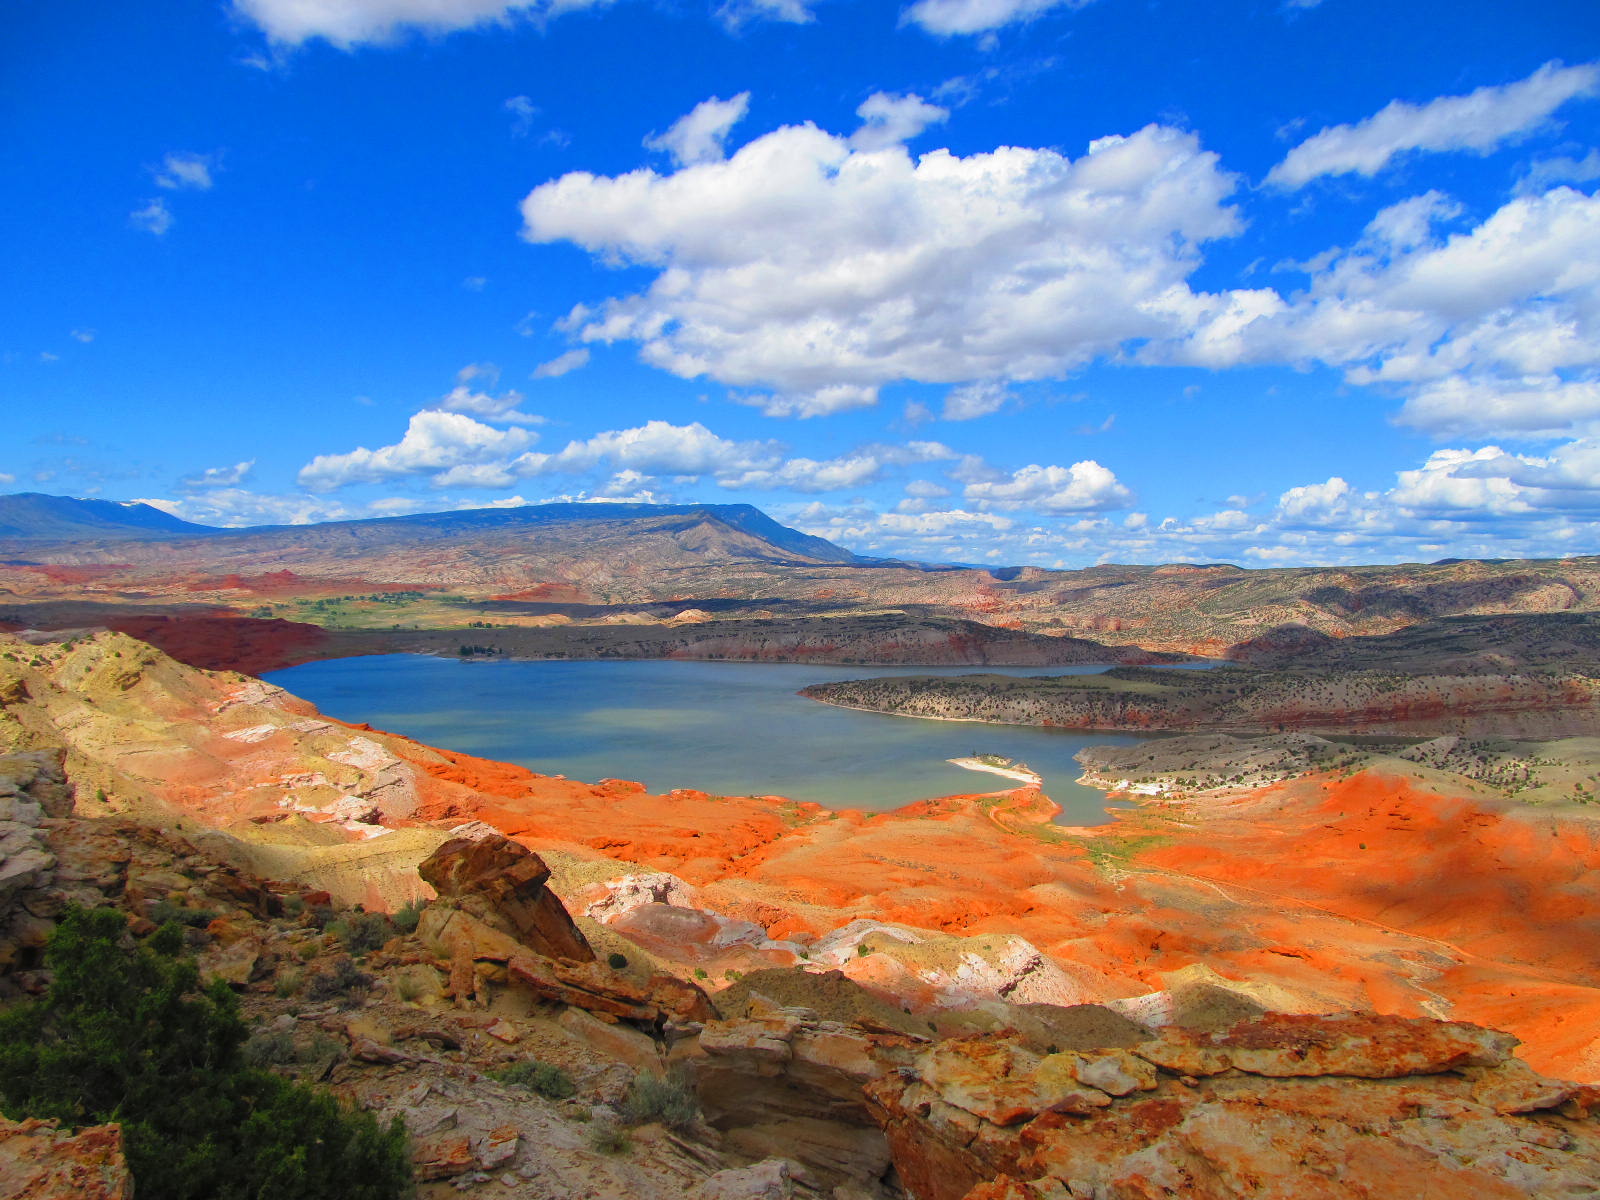 Red hills in the foreground with Bighorn Lake in the background with a brilliant blue sky.